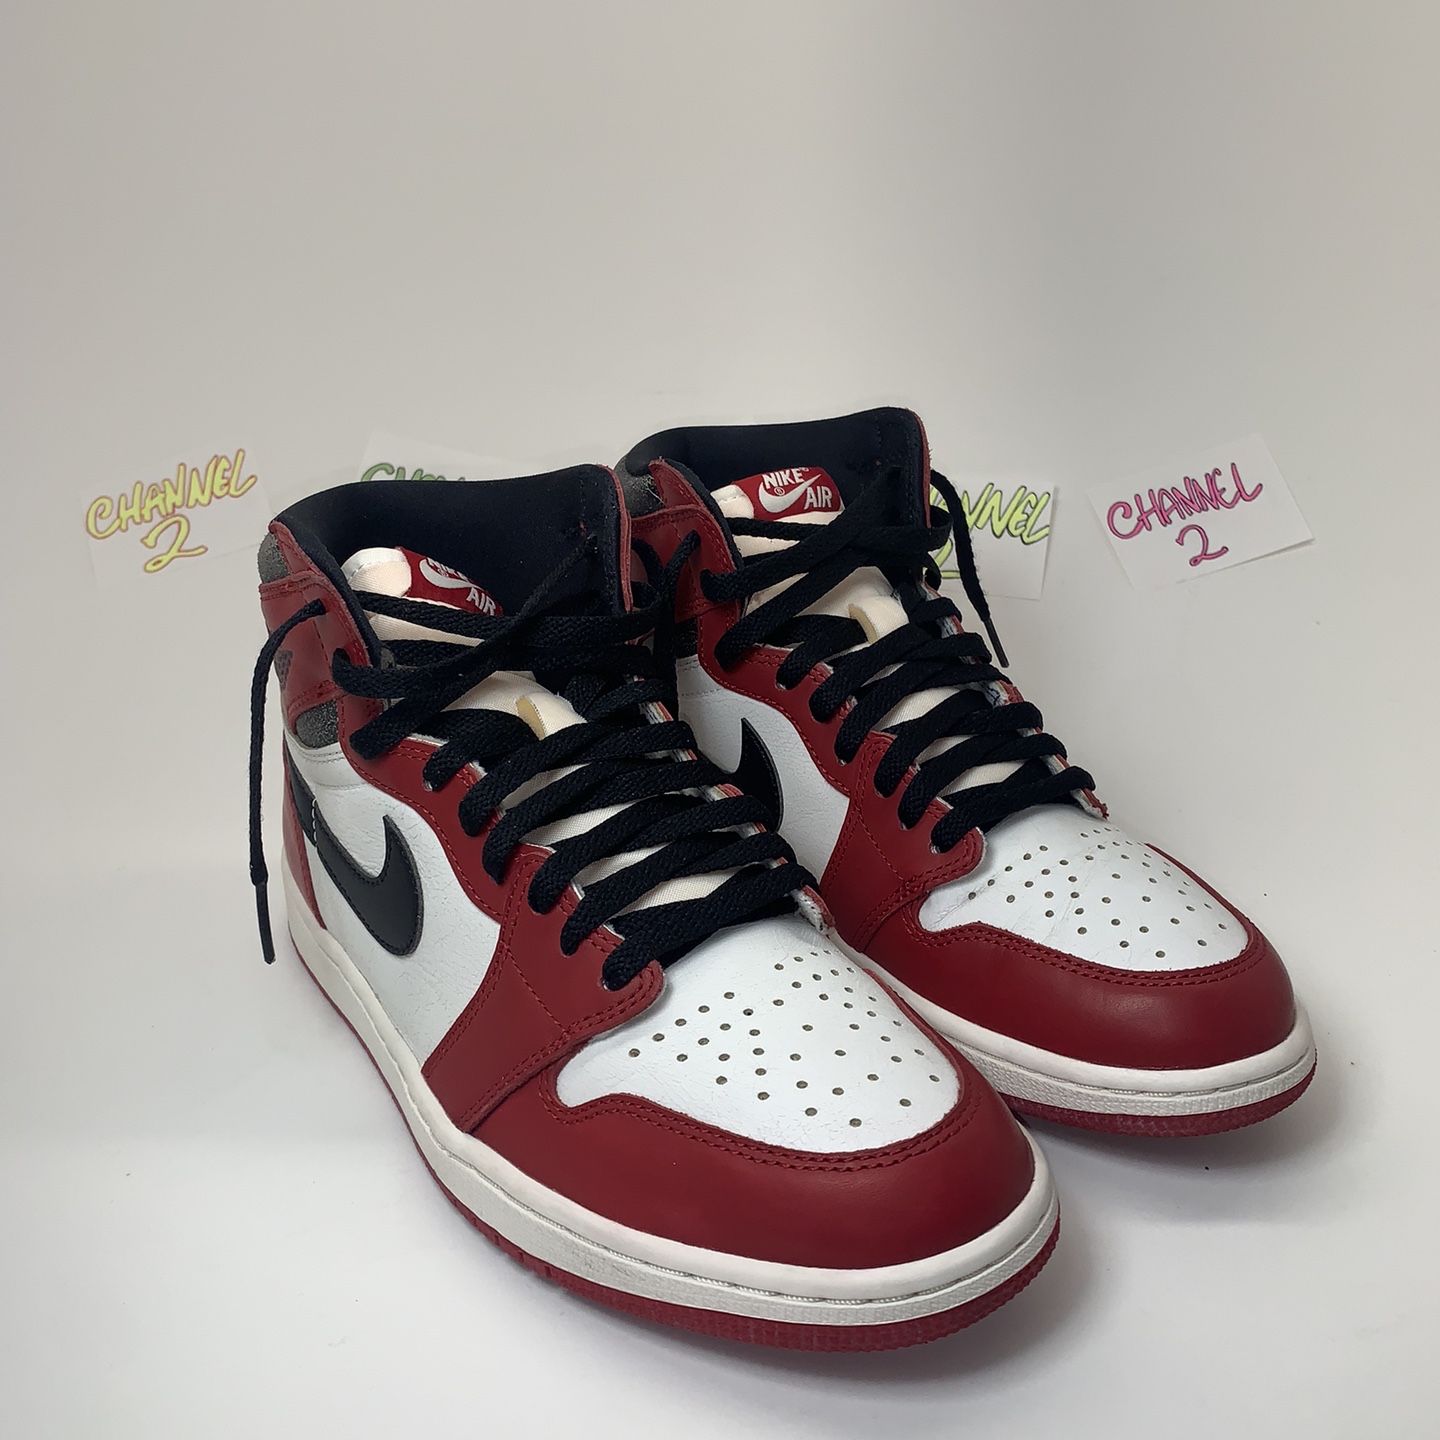 Jordan 1 Lost And Found Chicago Size 9.5